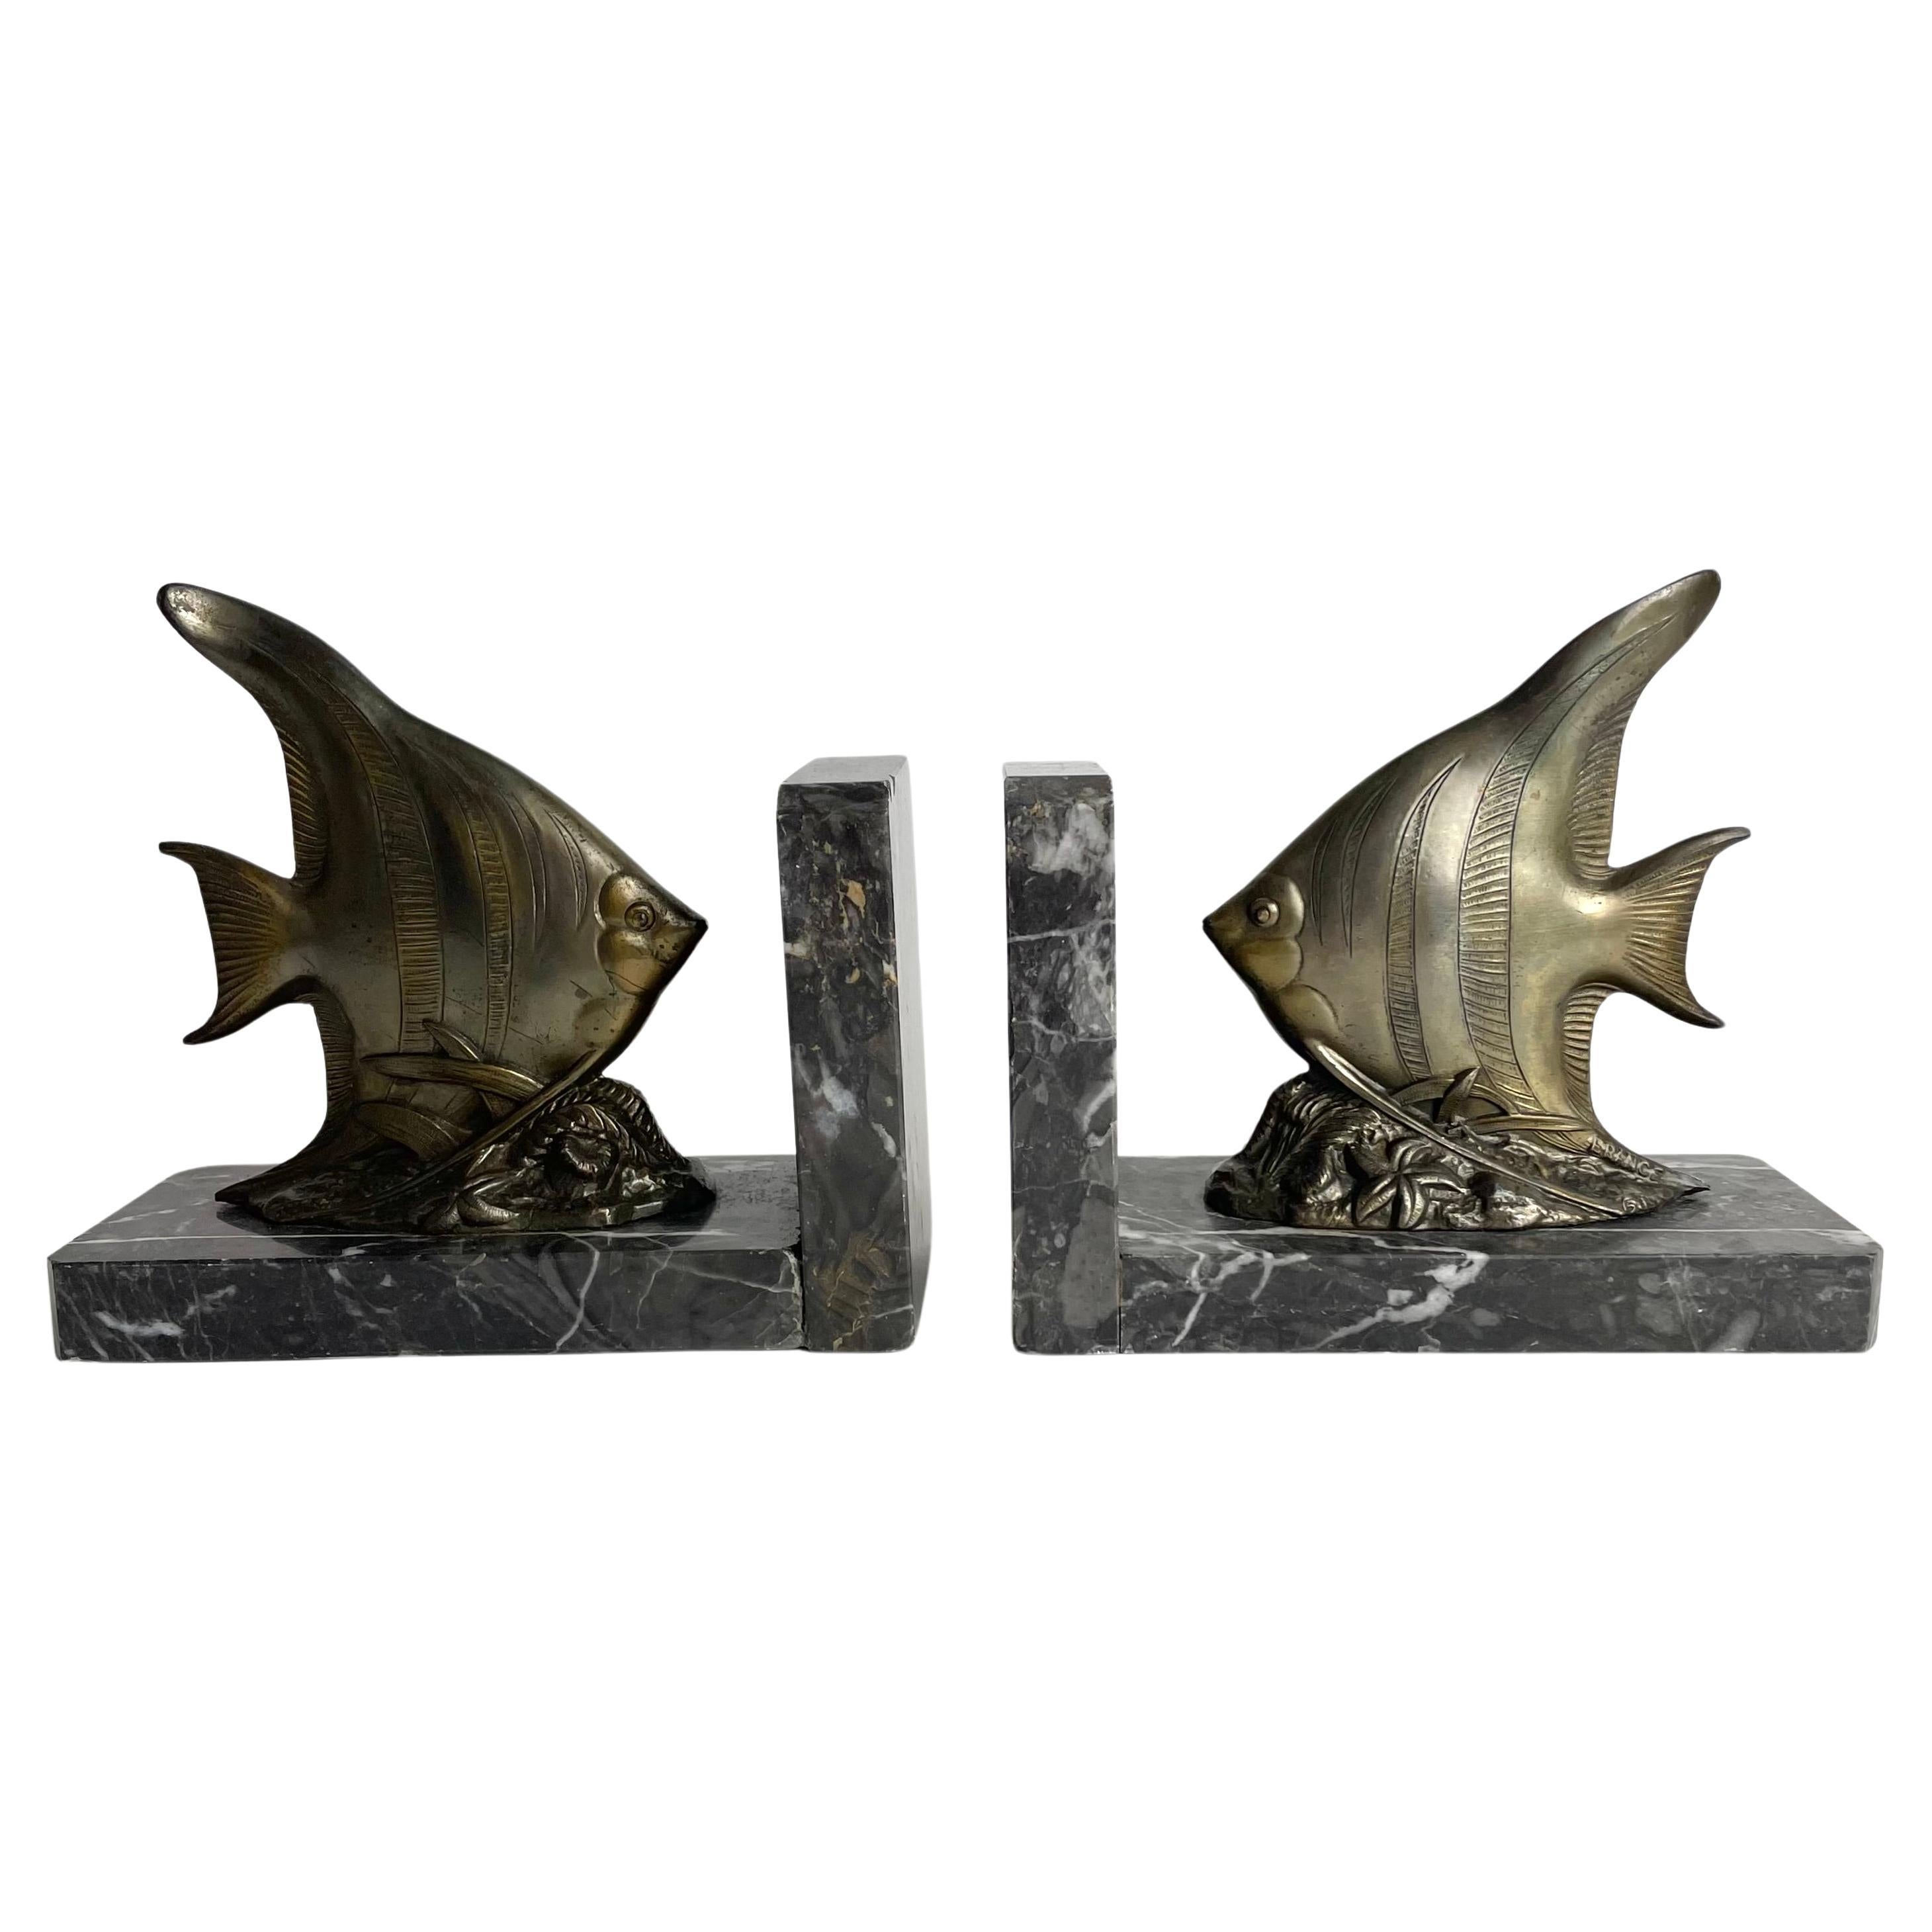 Beautiful pair of Art Deco Bookends from the 1930s with very period fishes